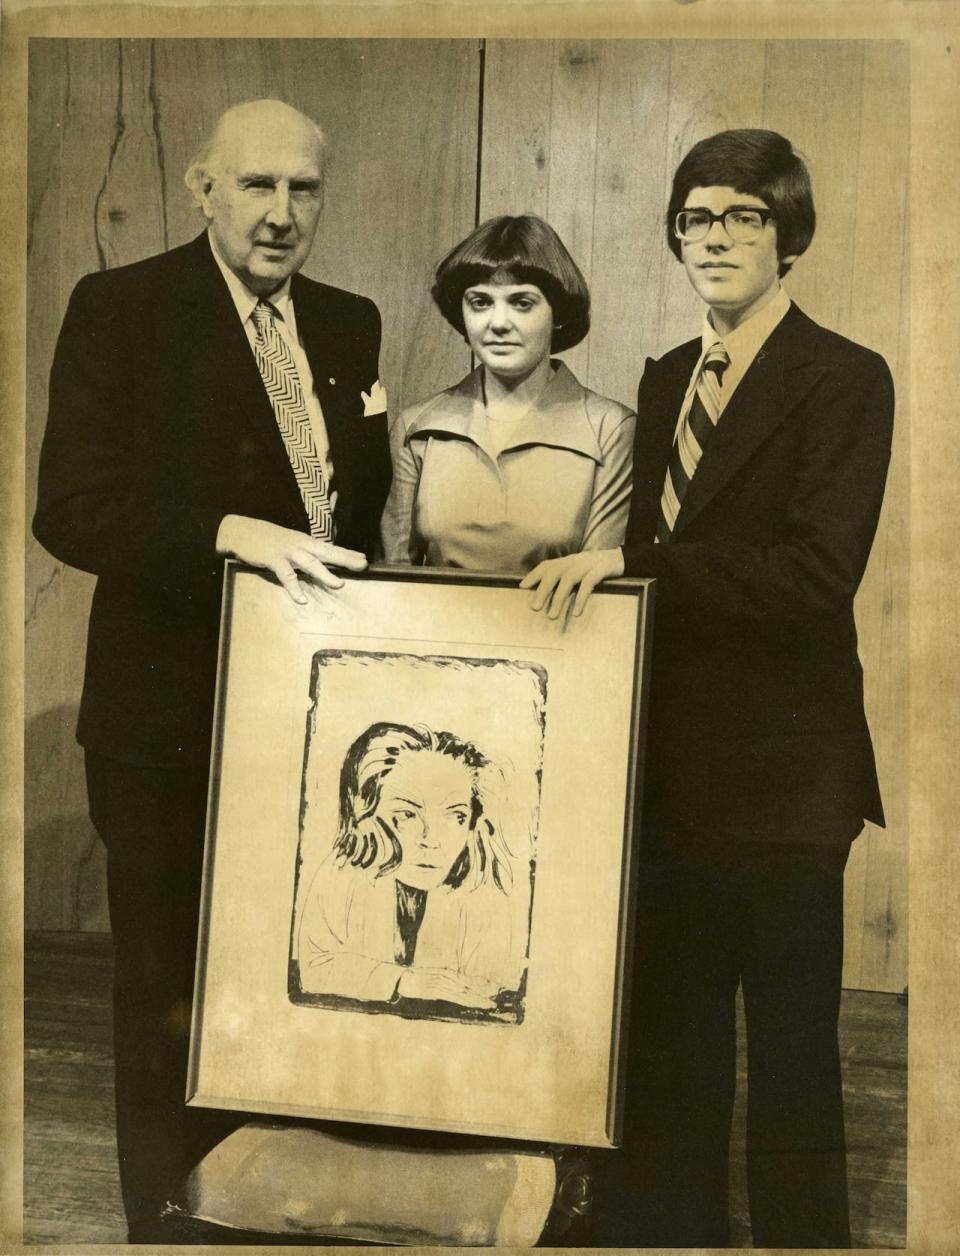 Ferdinand Eckhardt, left, poses with Eckhardt-Gramatté Music Competition winners Desmond Hoebig, right, and Gwen Hoebig, who went on to become concertmaster with the Winnipeg Symphony Orchestra. Taken in 1977, the photo shows the trio with a painting of Sophie-Carmen Eckhardt-Gramatté.